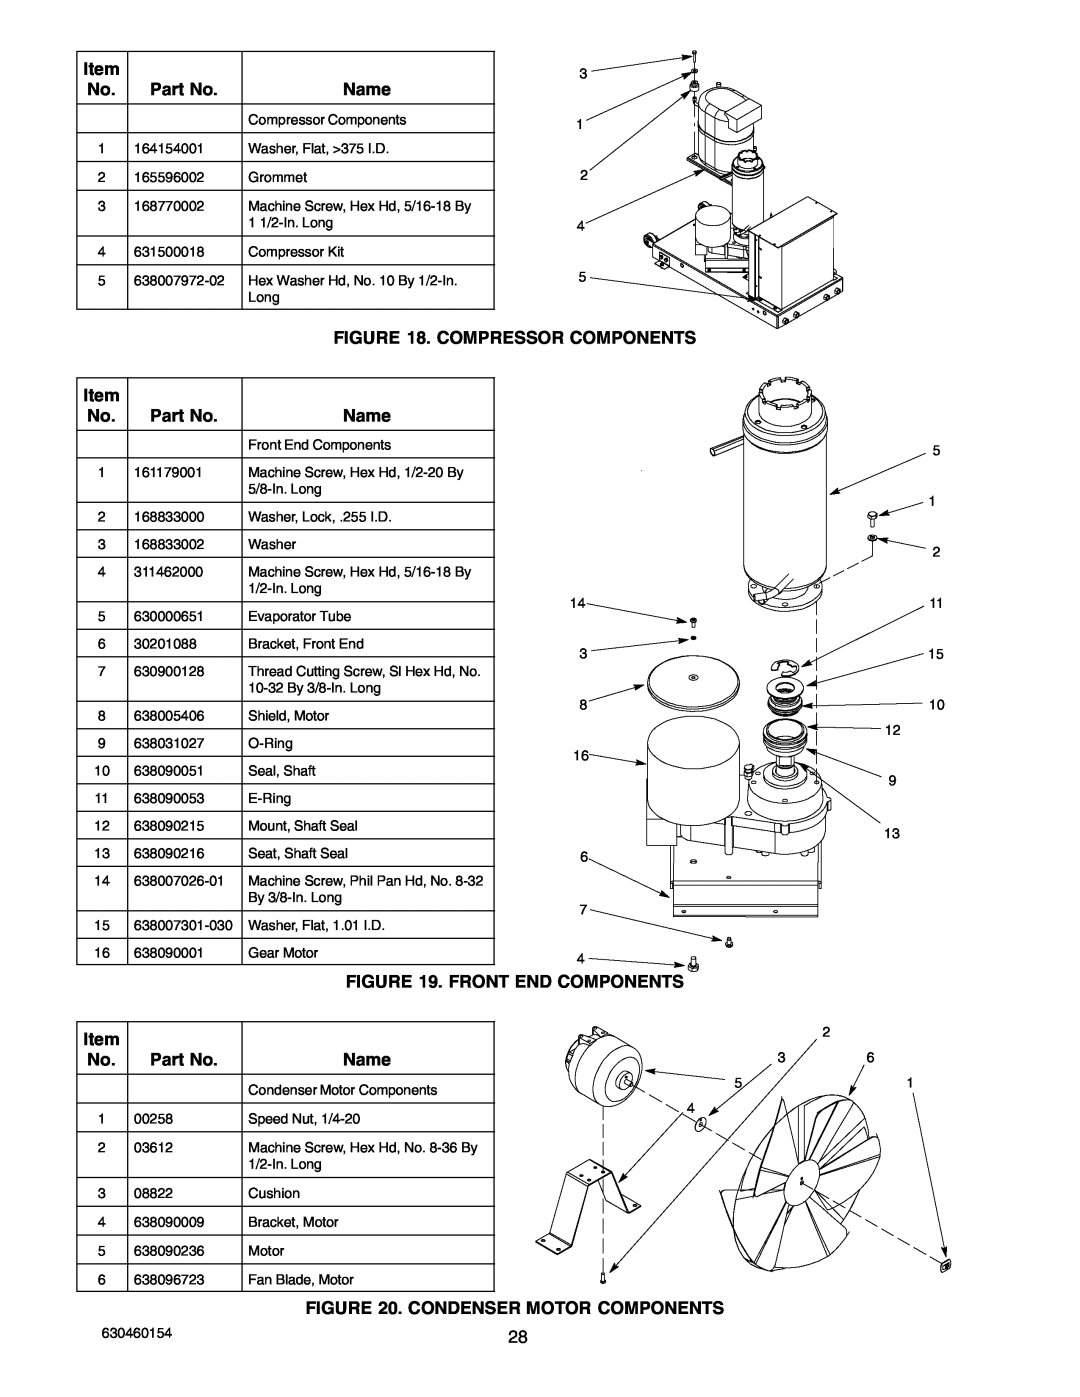 Cornelius UCR 700 Series service manual Compressor Components, Front End Components, Condenser Motor Components, Name 